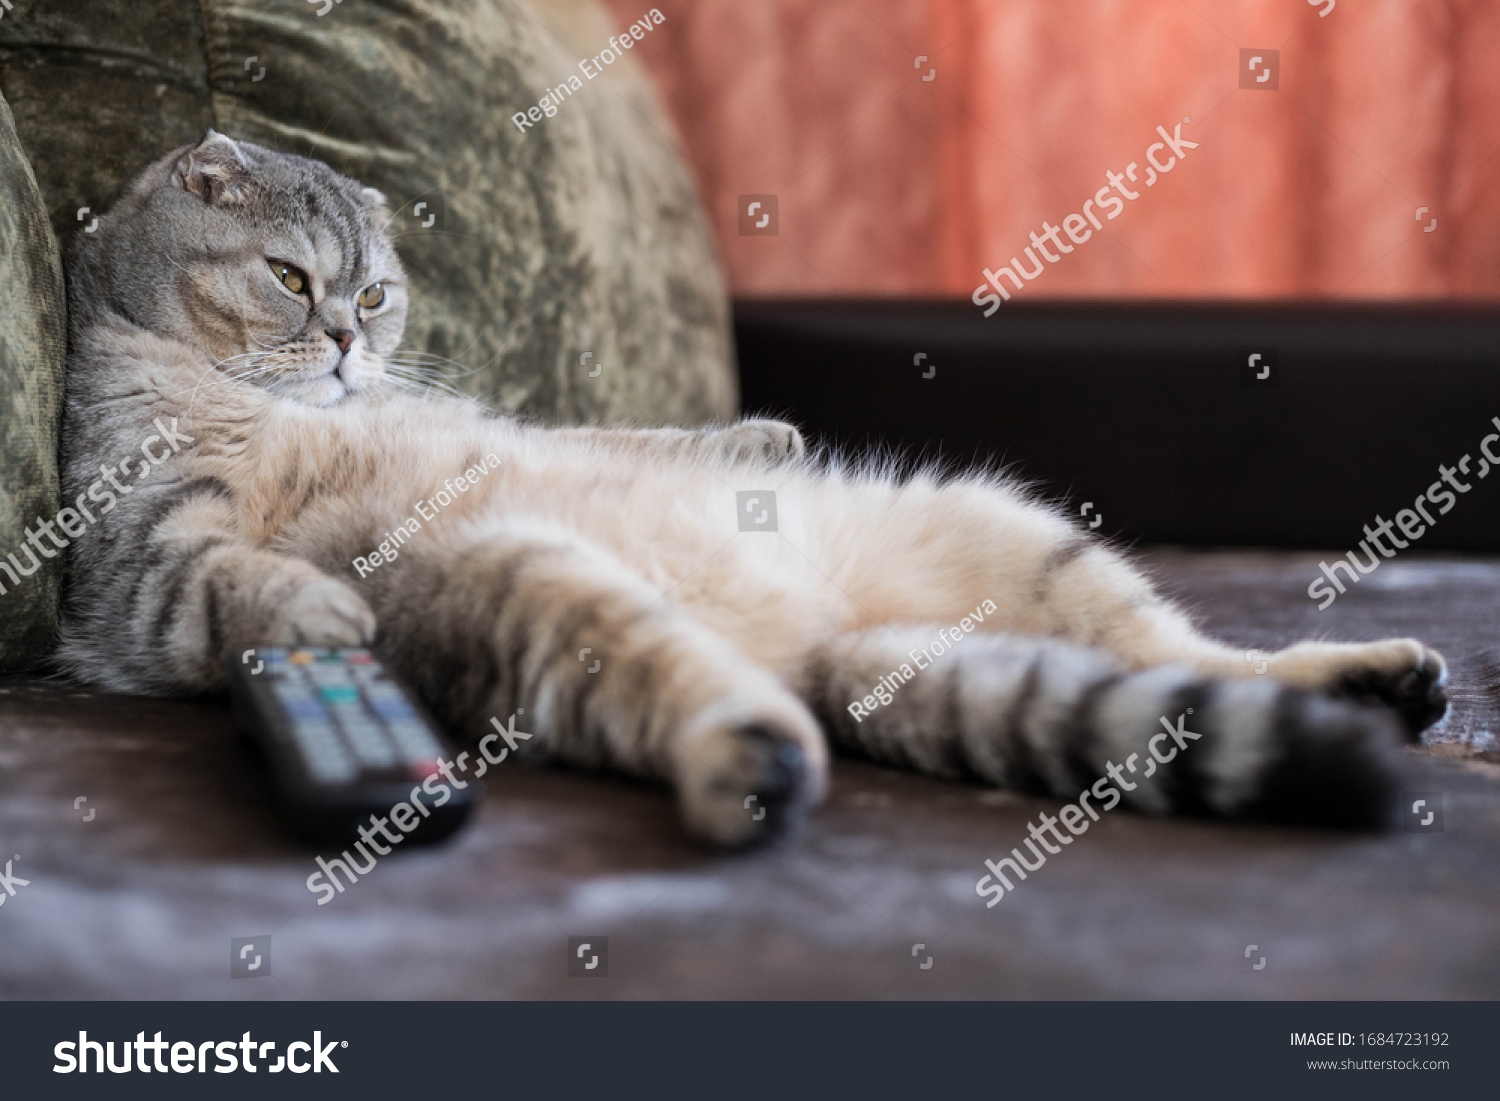 A lazy fat cat is lying asleep on the sofa with a remote control from the TV #1684723192